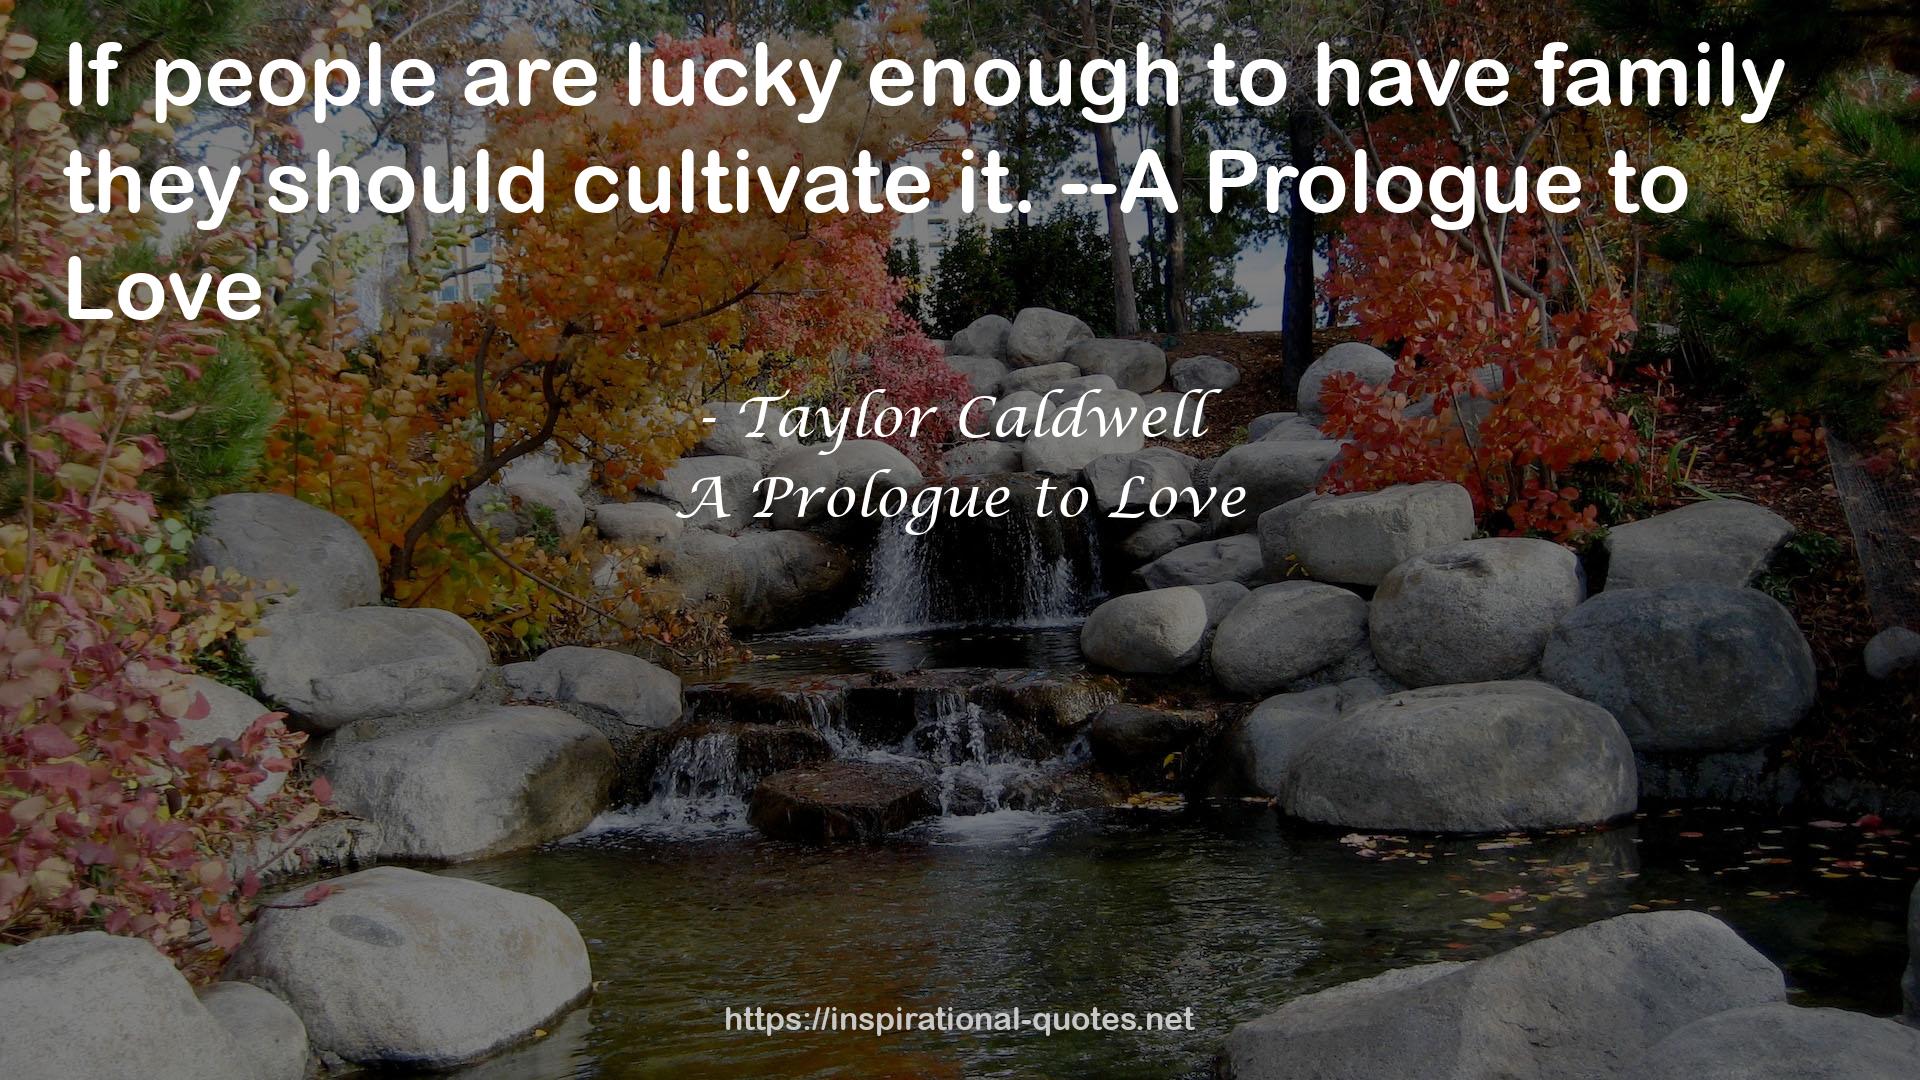 Taylor Caldwell QUOTES